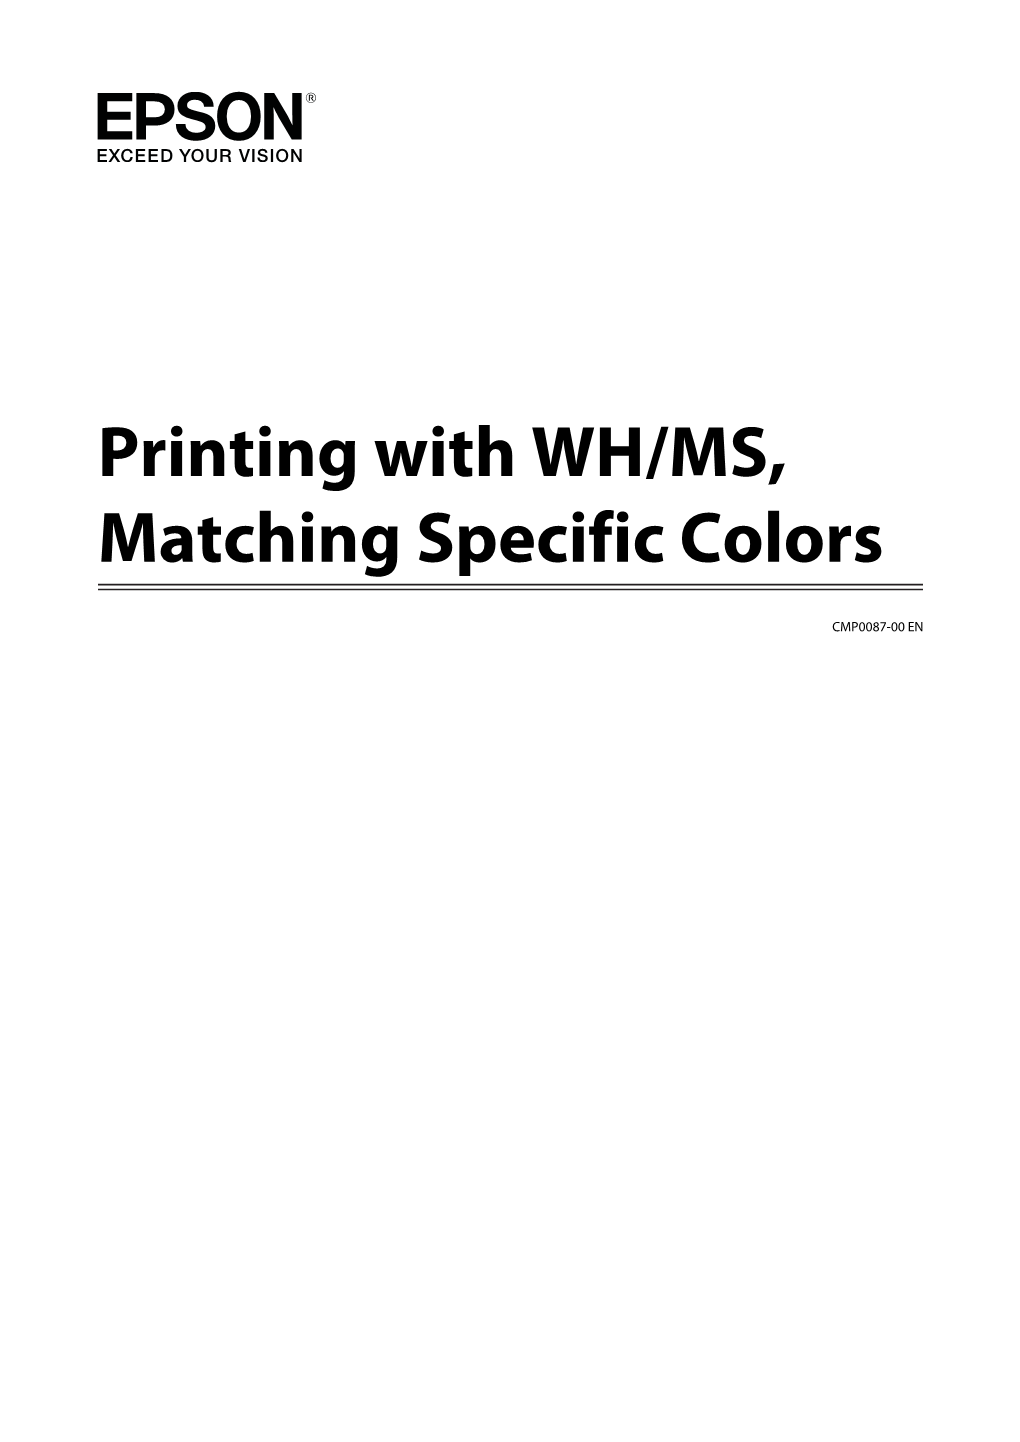 Printing with WH/MS, Matching Specific Colors